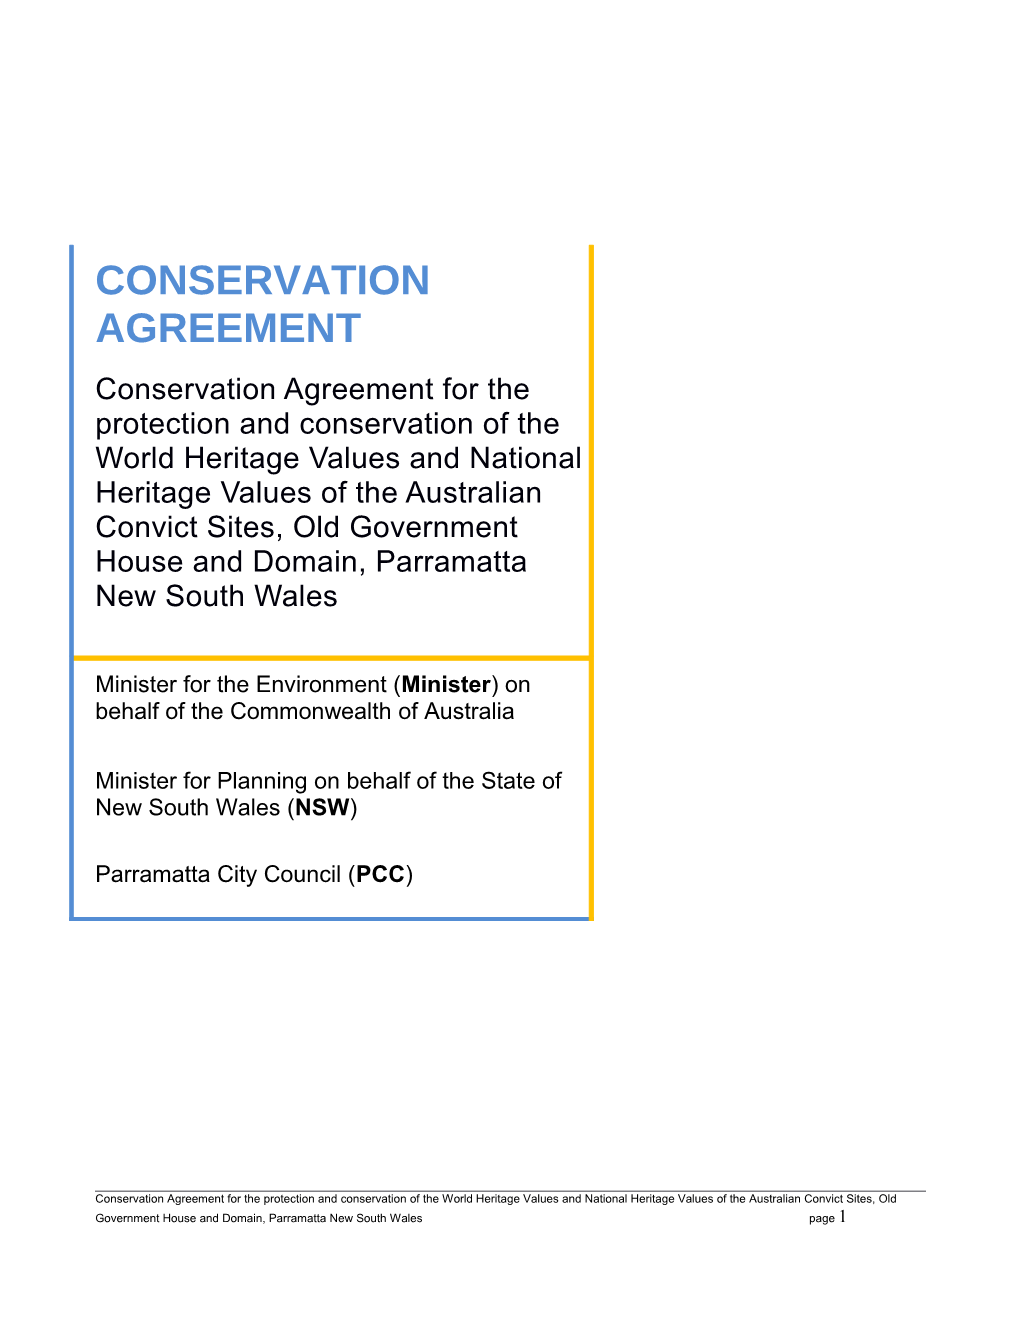 Conservation Agreement for the Protection and Conservation of the World Heritage Values